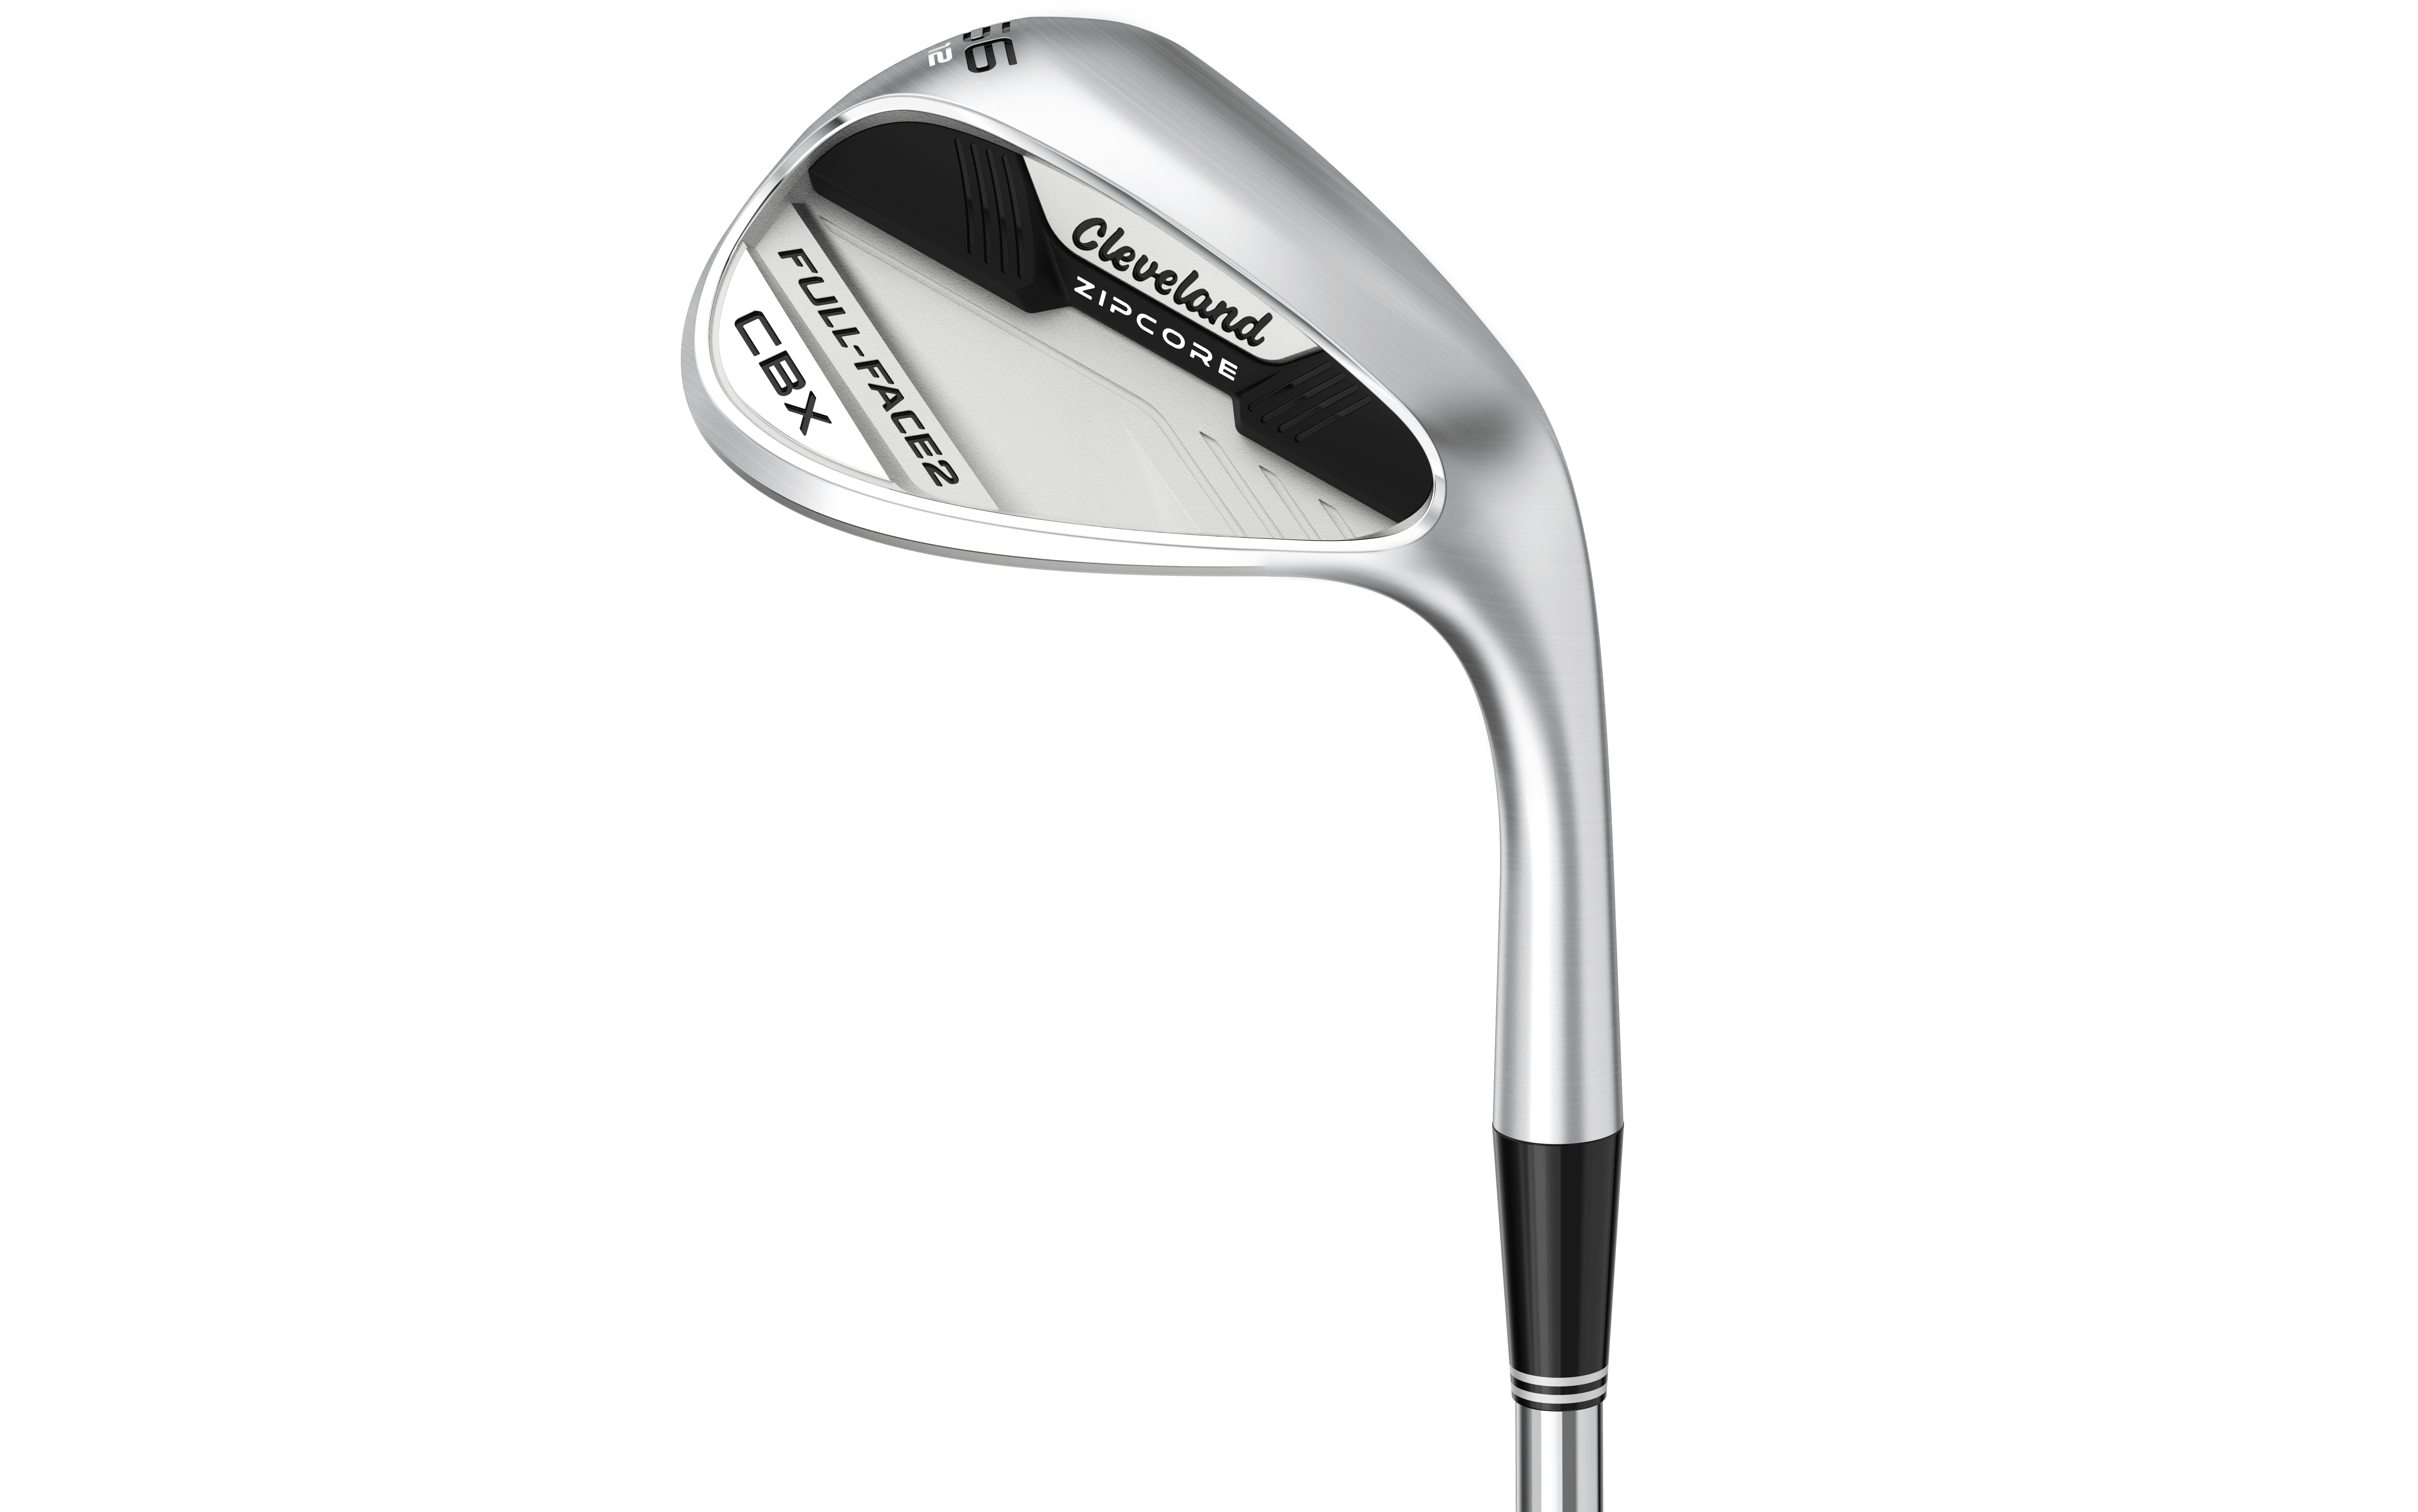 Cleveland CBX Full Face 2 Tour Satin Wedge · Left handed · Graphite · Wedge · 56°